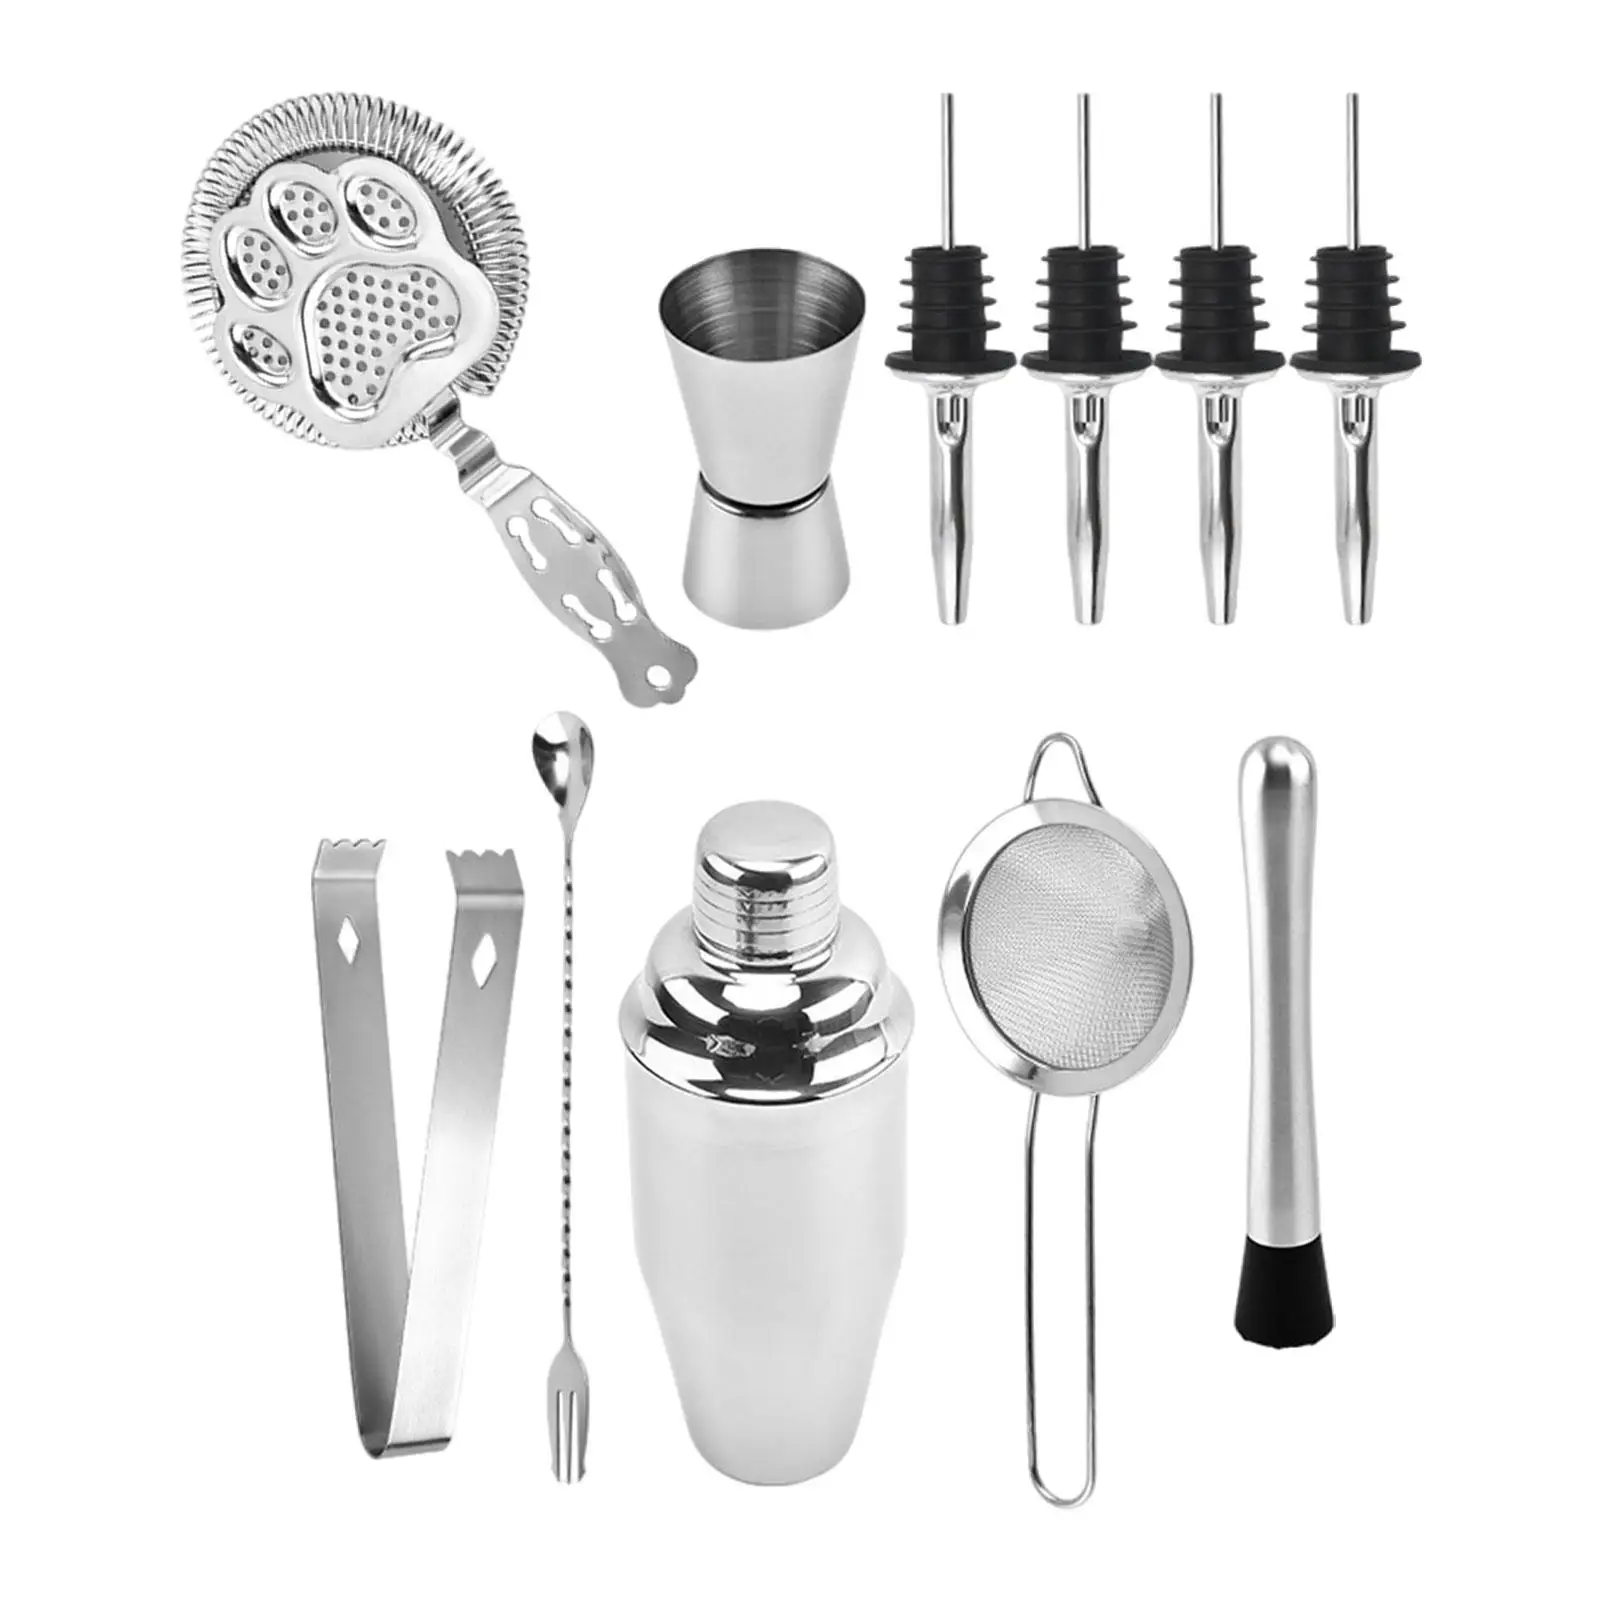 Barware Sets Leakproof Drink Mixer Multitool Boston Shaker Juice Making Kits for Birthday Gifts Wedding Party Traveling Home